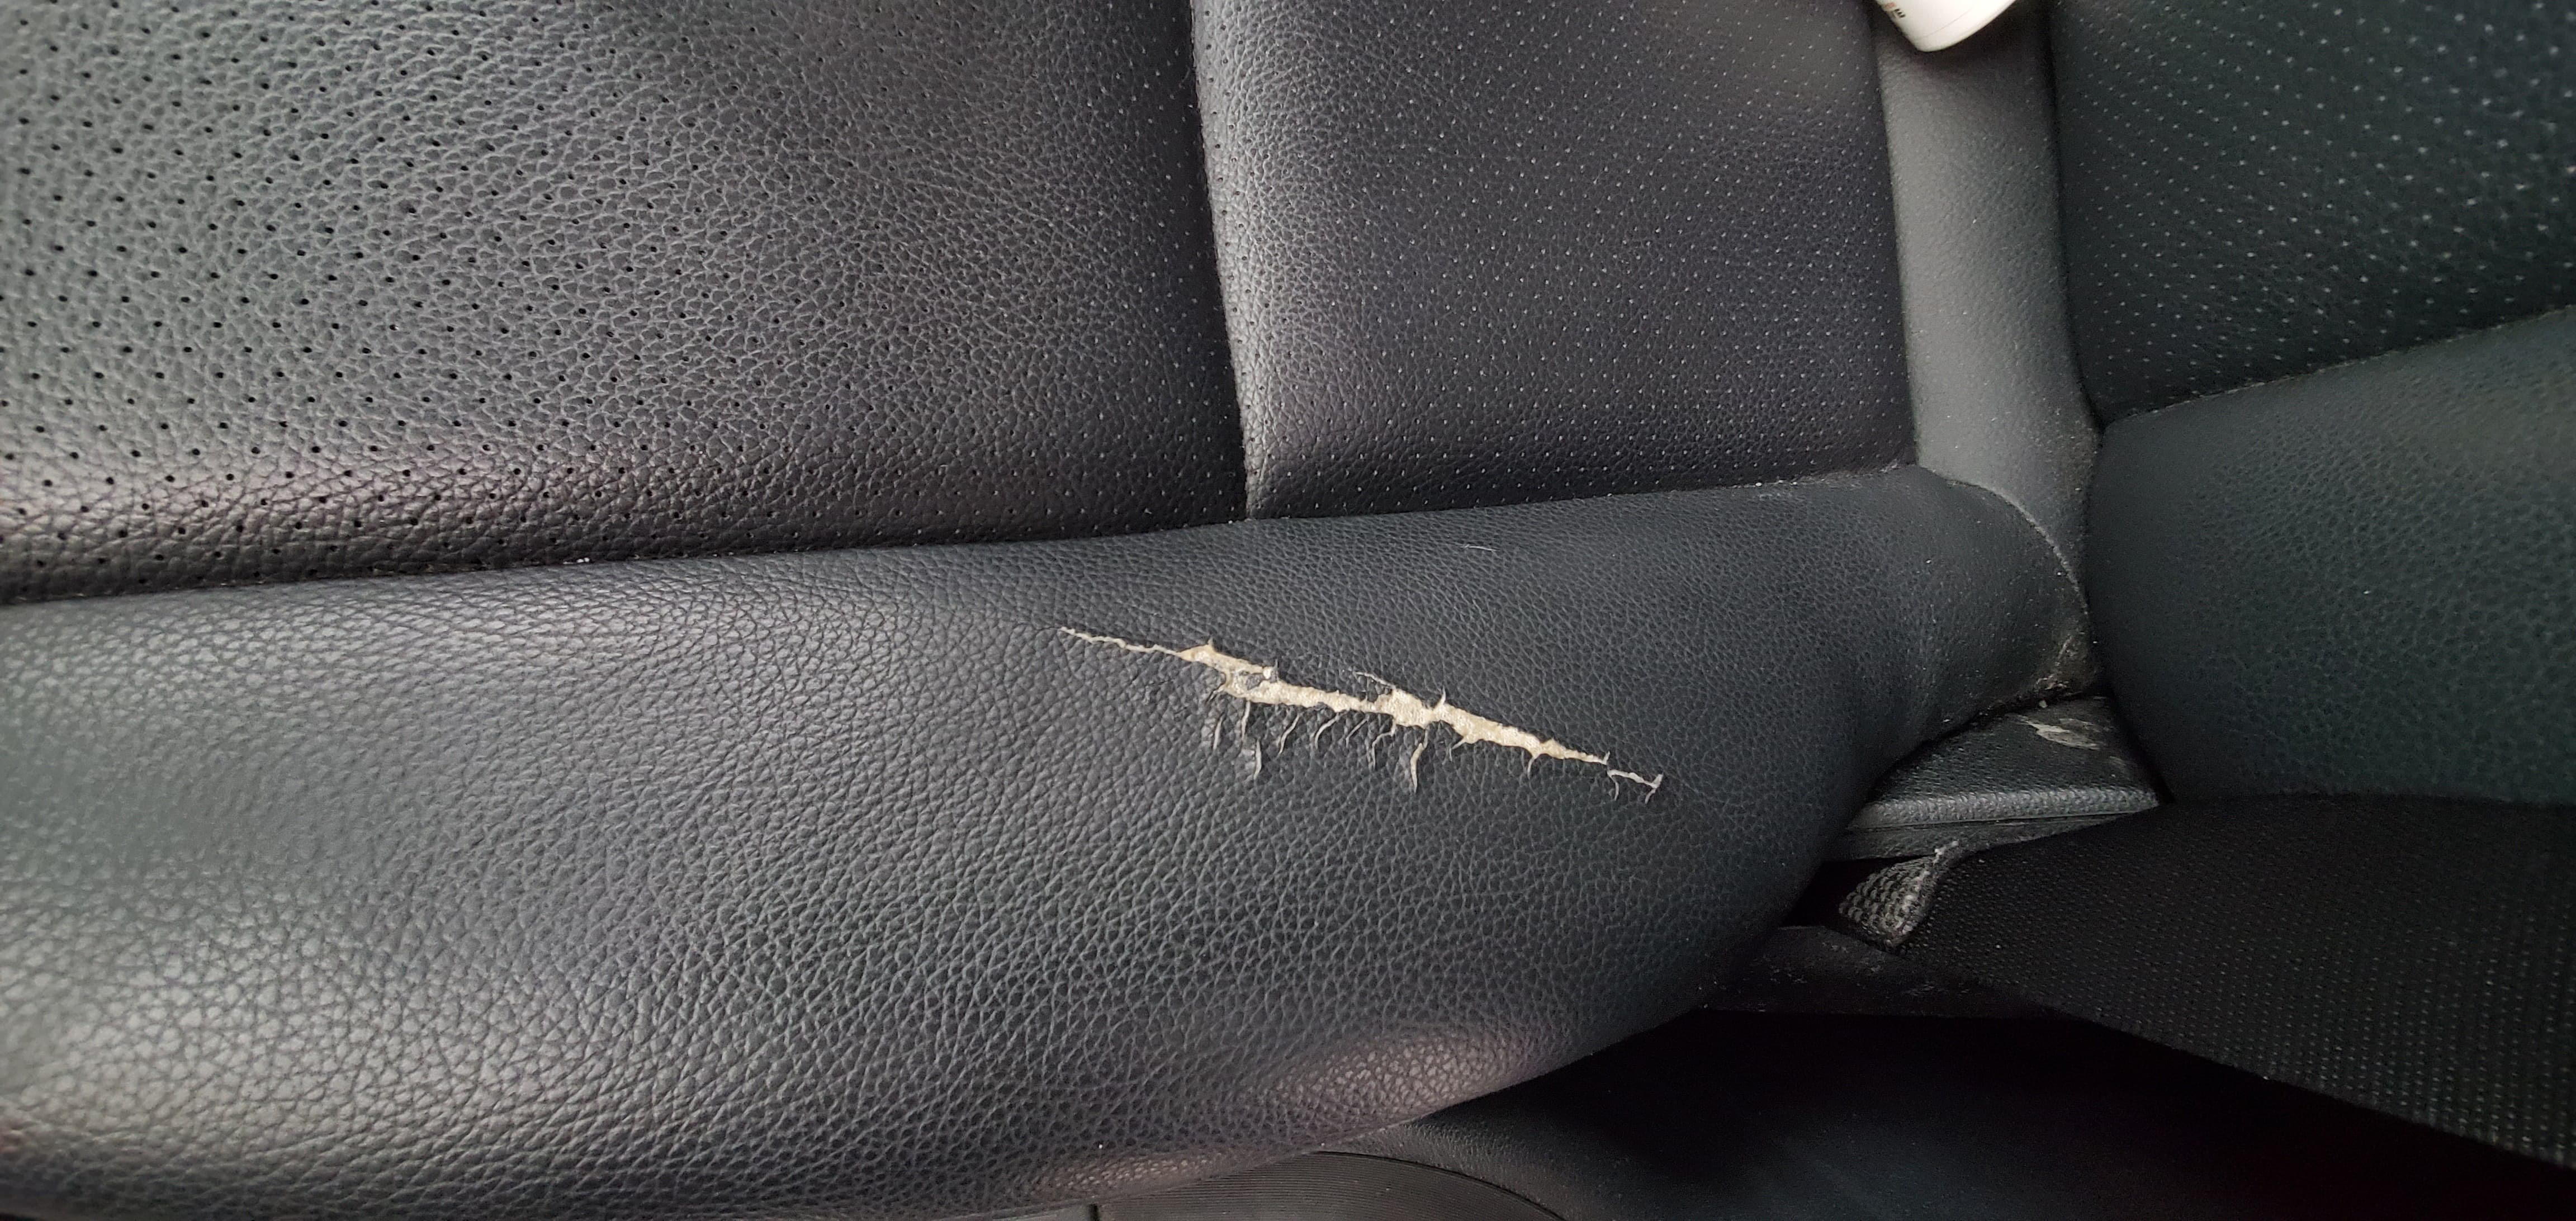 How To Repair A Leather Car Seat - How To Fix Rip In Leather Seat